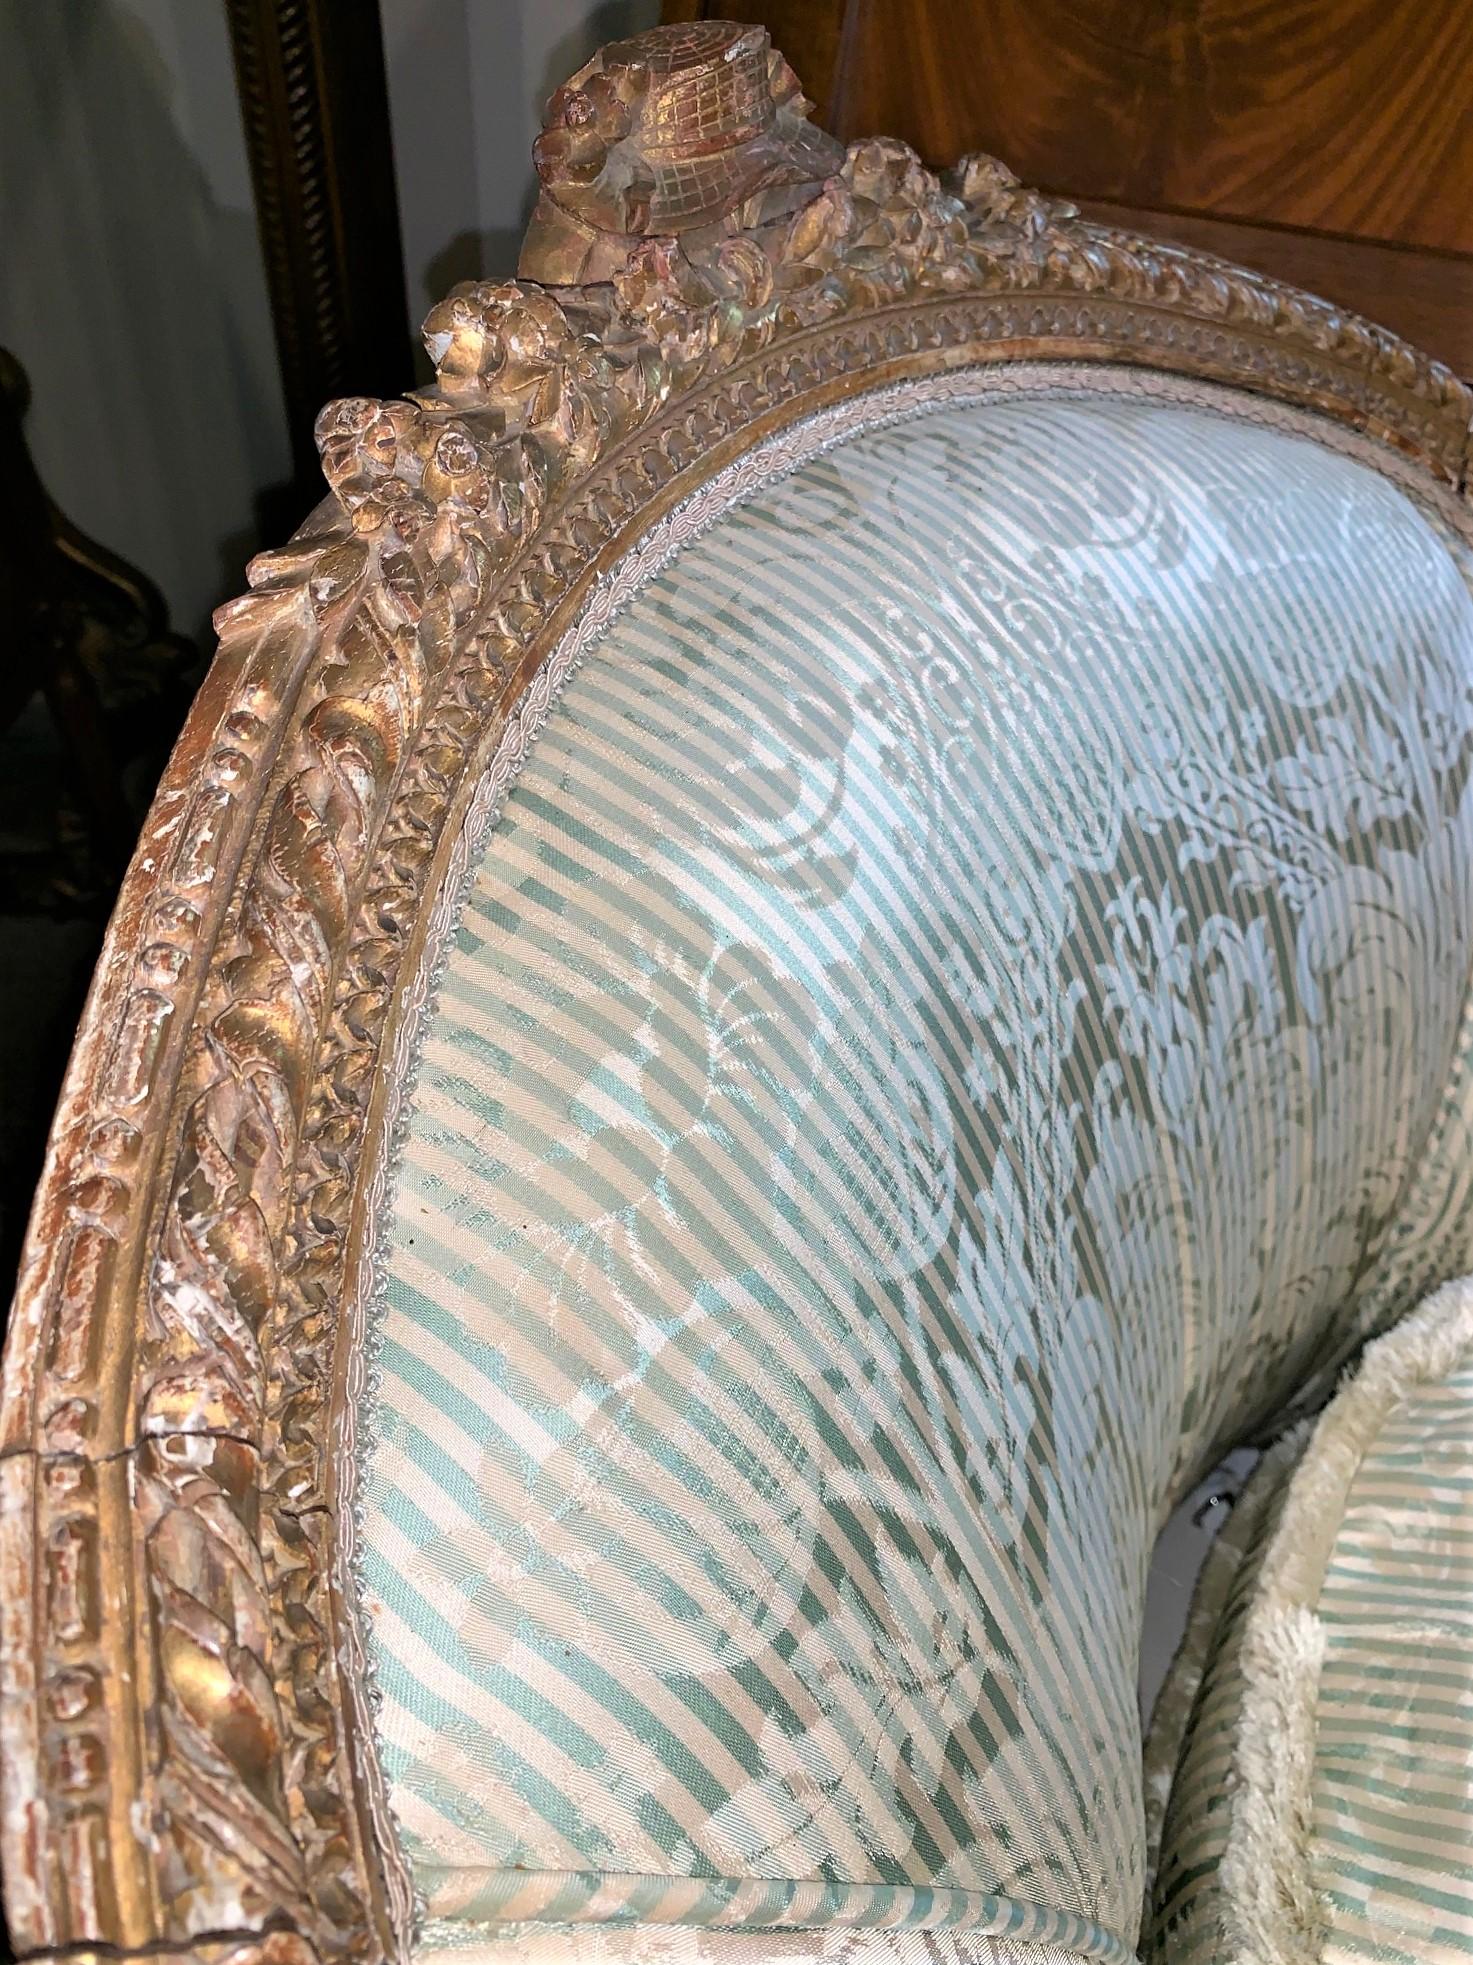 Impressive 19th French Louis XVI style chaise lounge or daybed crafted of carved giltwood. Elegant lines and nicely aged gold patina. Upholstered in silk with tear on the front cushion, (see photos),

circa 1870.